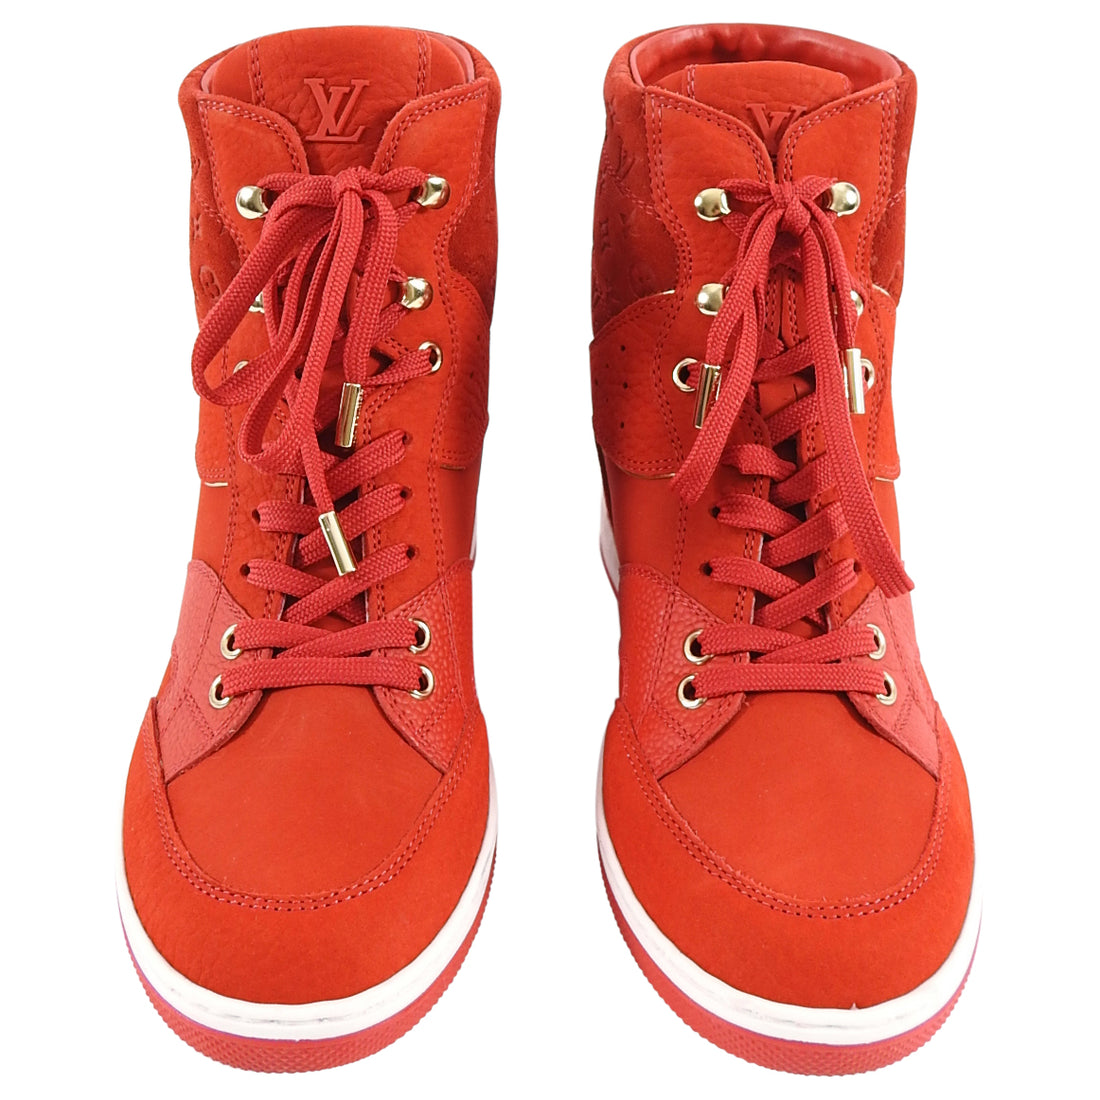 Louis Vuitton Red Leather and Suede Cliff Top Sneakers Size 37 Louis Vuitton